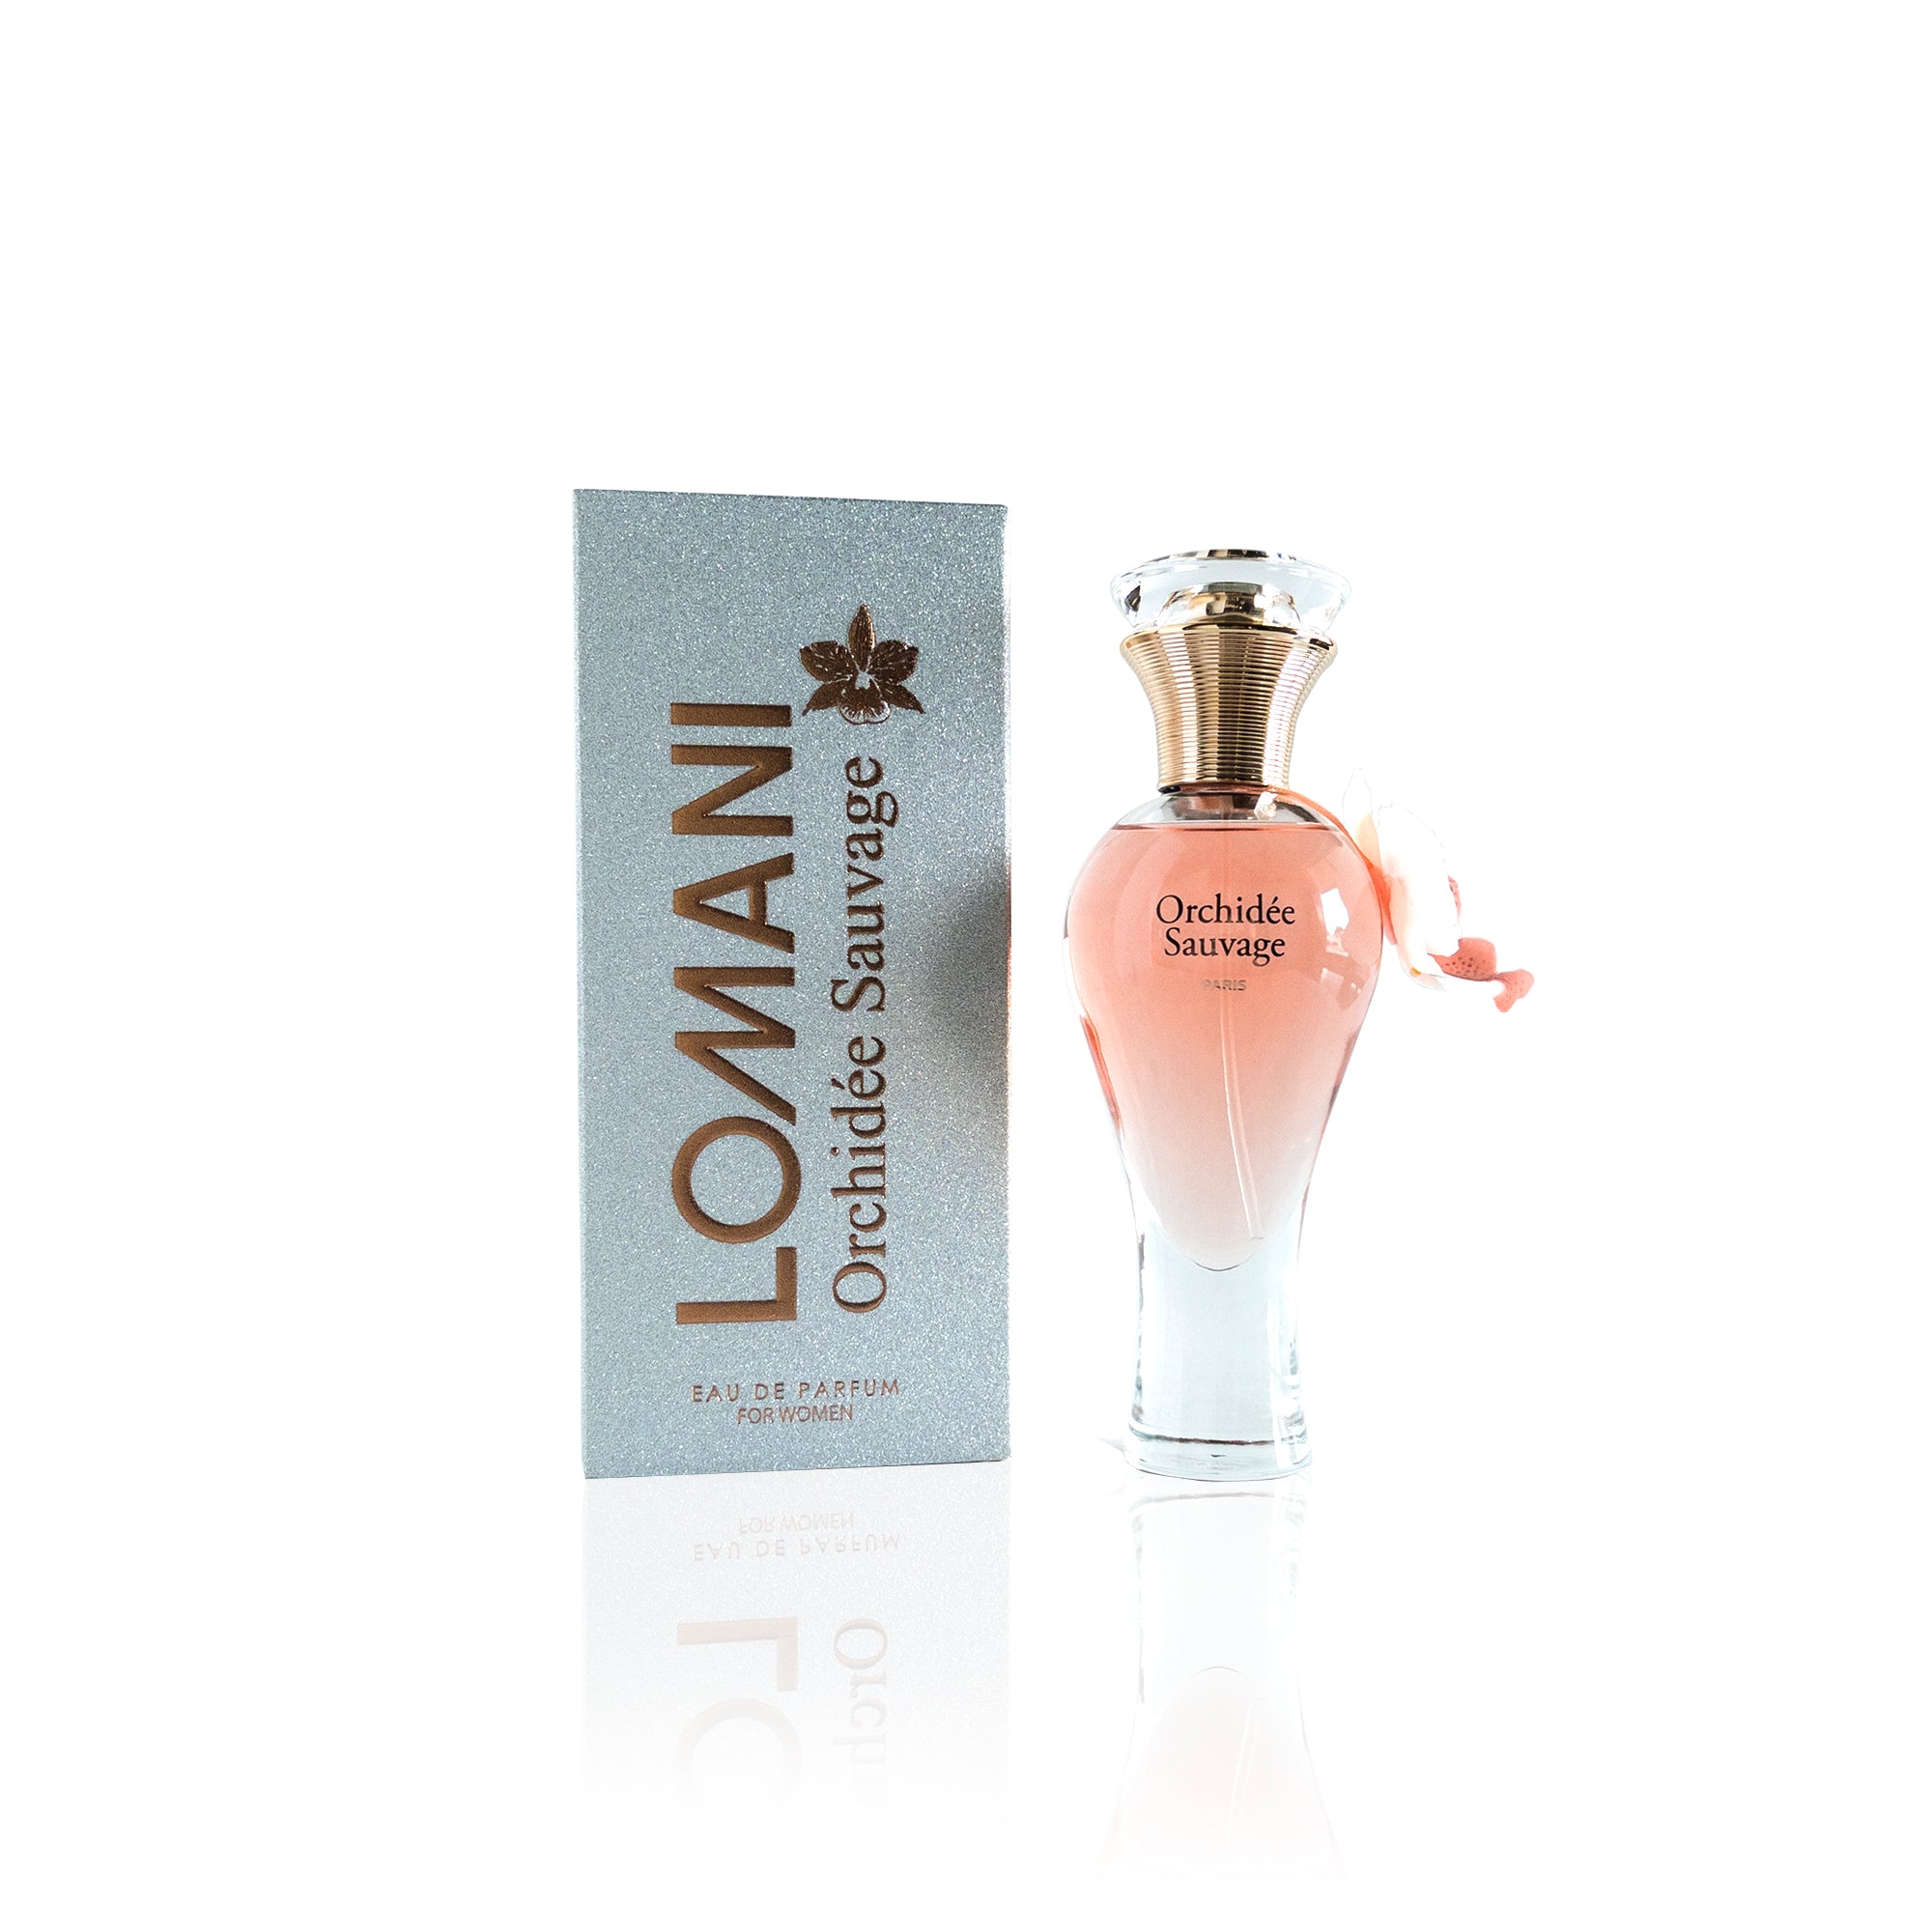 Lomani Bleu Nuit and Orchidee Sauvage Review. 